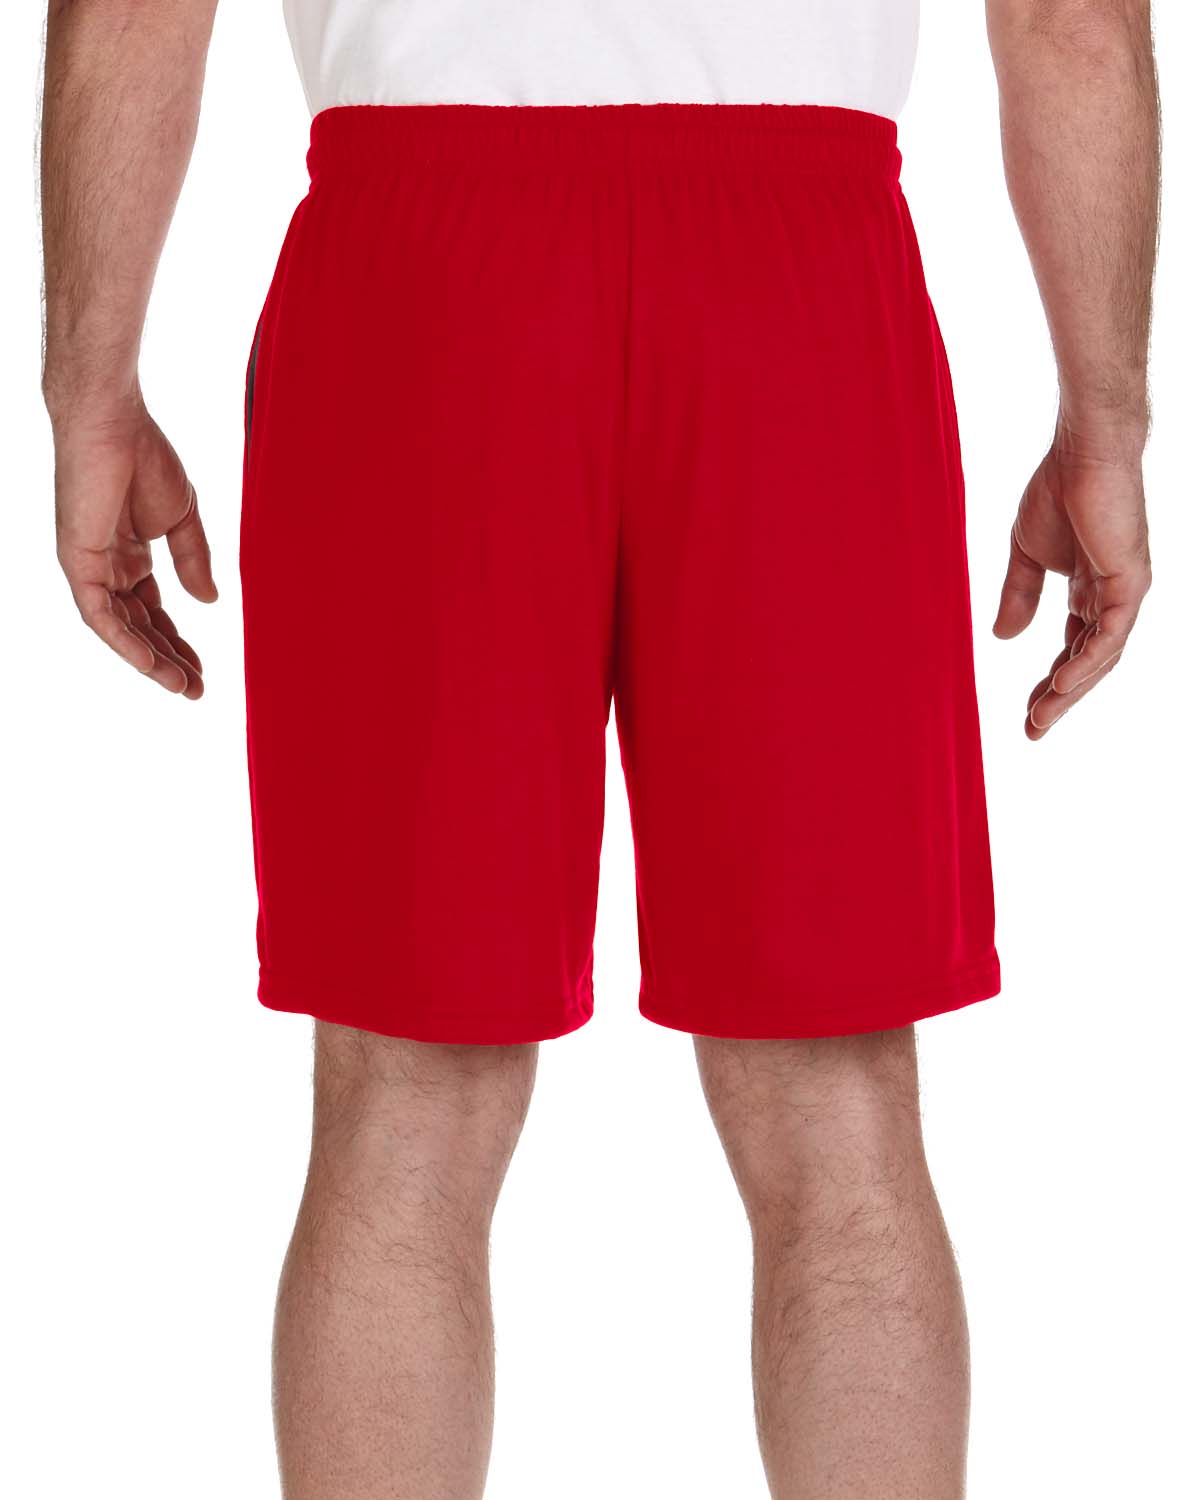 Gildan Mens Dri-Fit Shorts with Pockets 100% Polyester 9 Inch S-3XL M-G44S30 